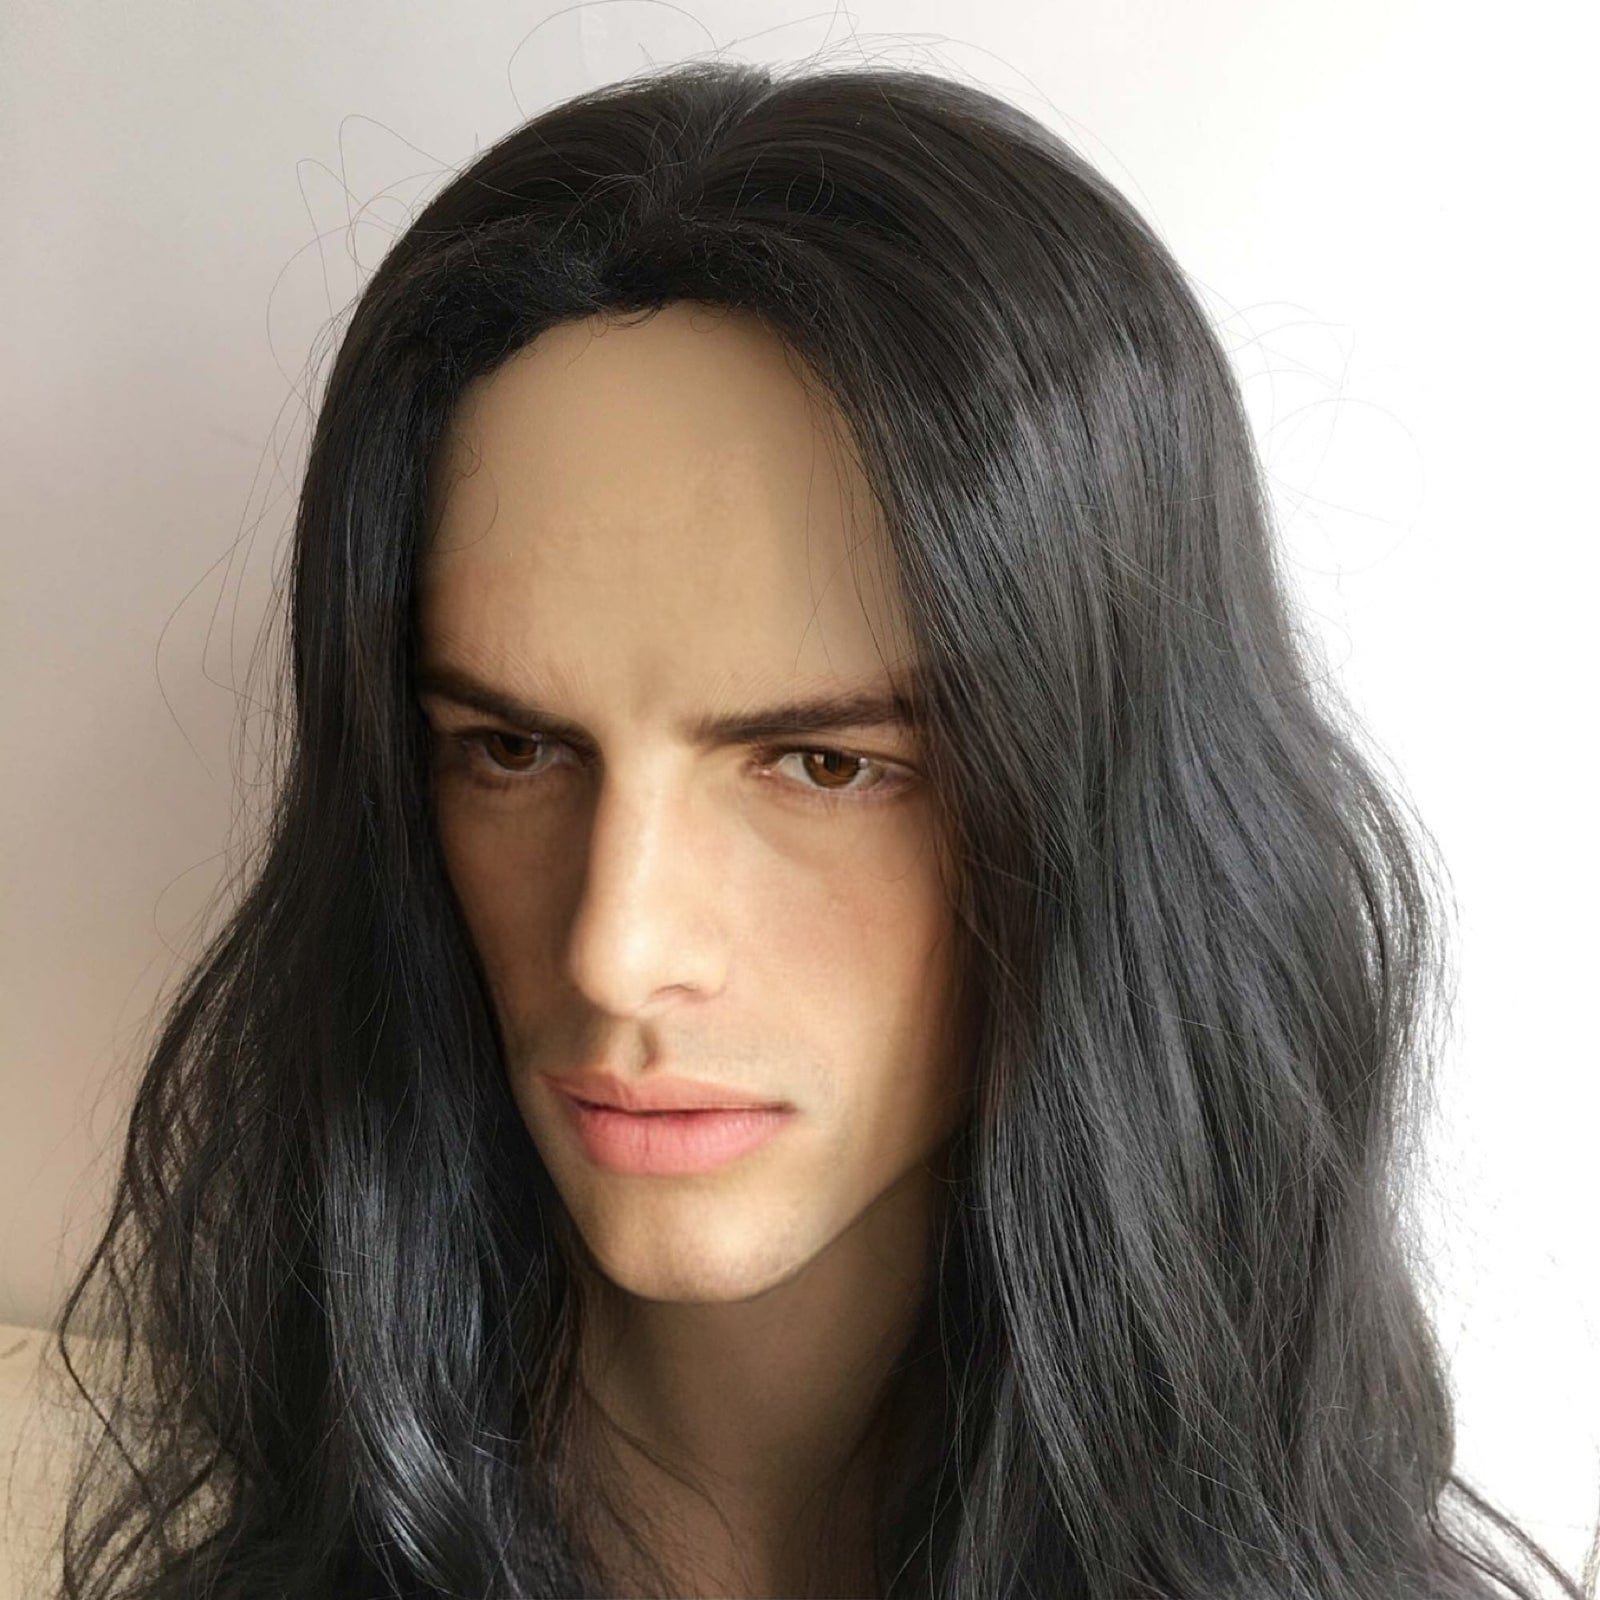 nevermindyrhead Men Black Long Wavy Middle Part Thick Volume Cosplay Costume Wig